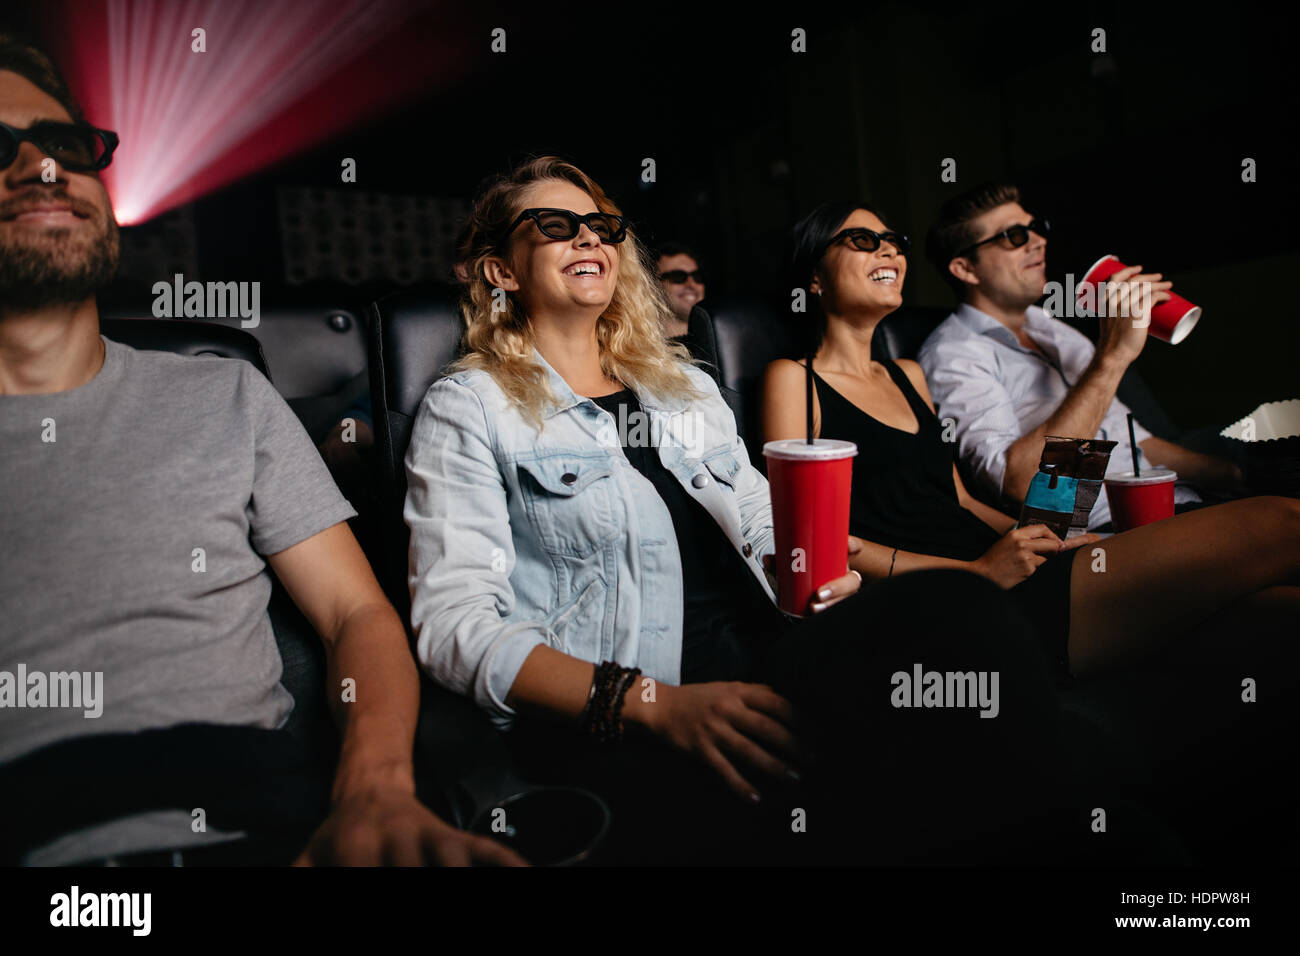 Young women and men watching 3d movie in cinema. Group of people in theater with 3d glasses and drinks. Stock Photo